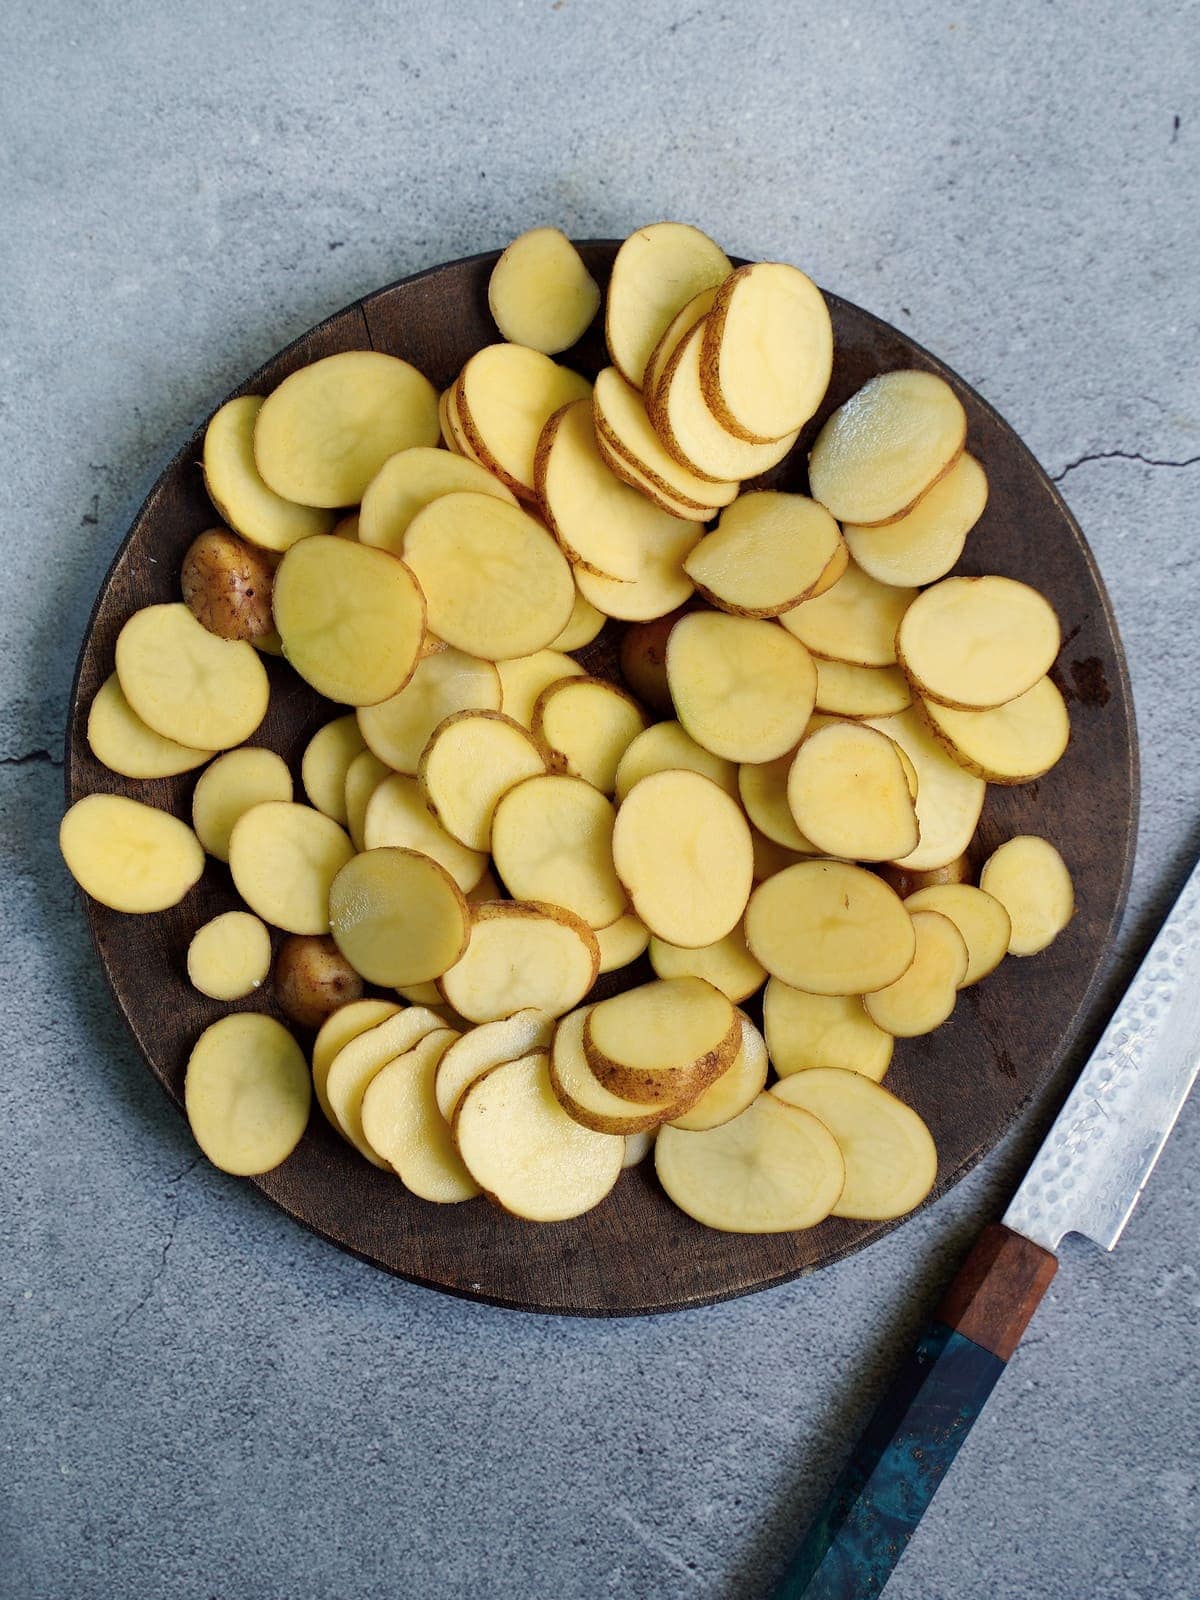 thinly sliced potato rounds on wooden board